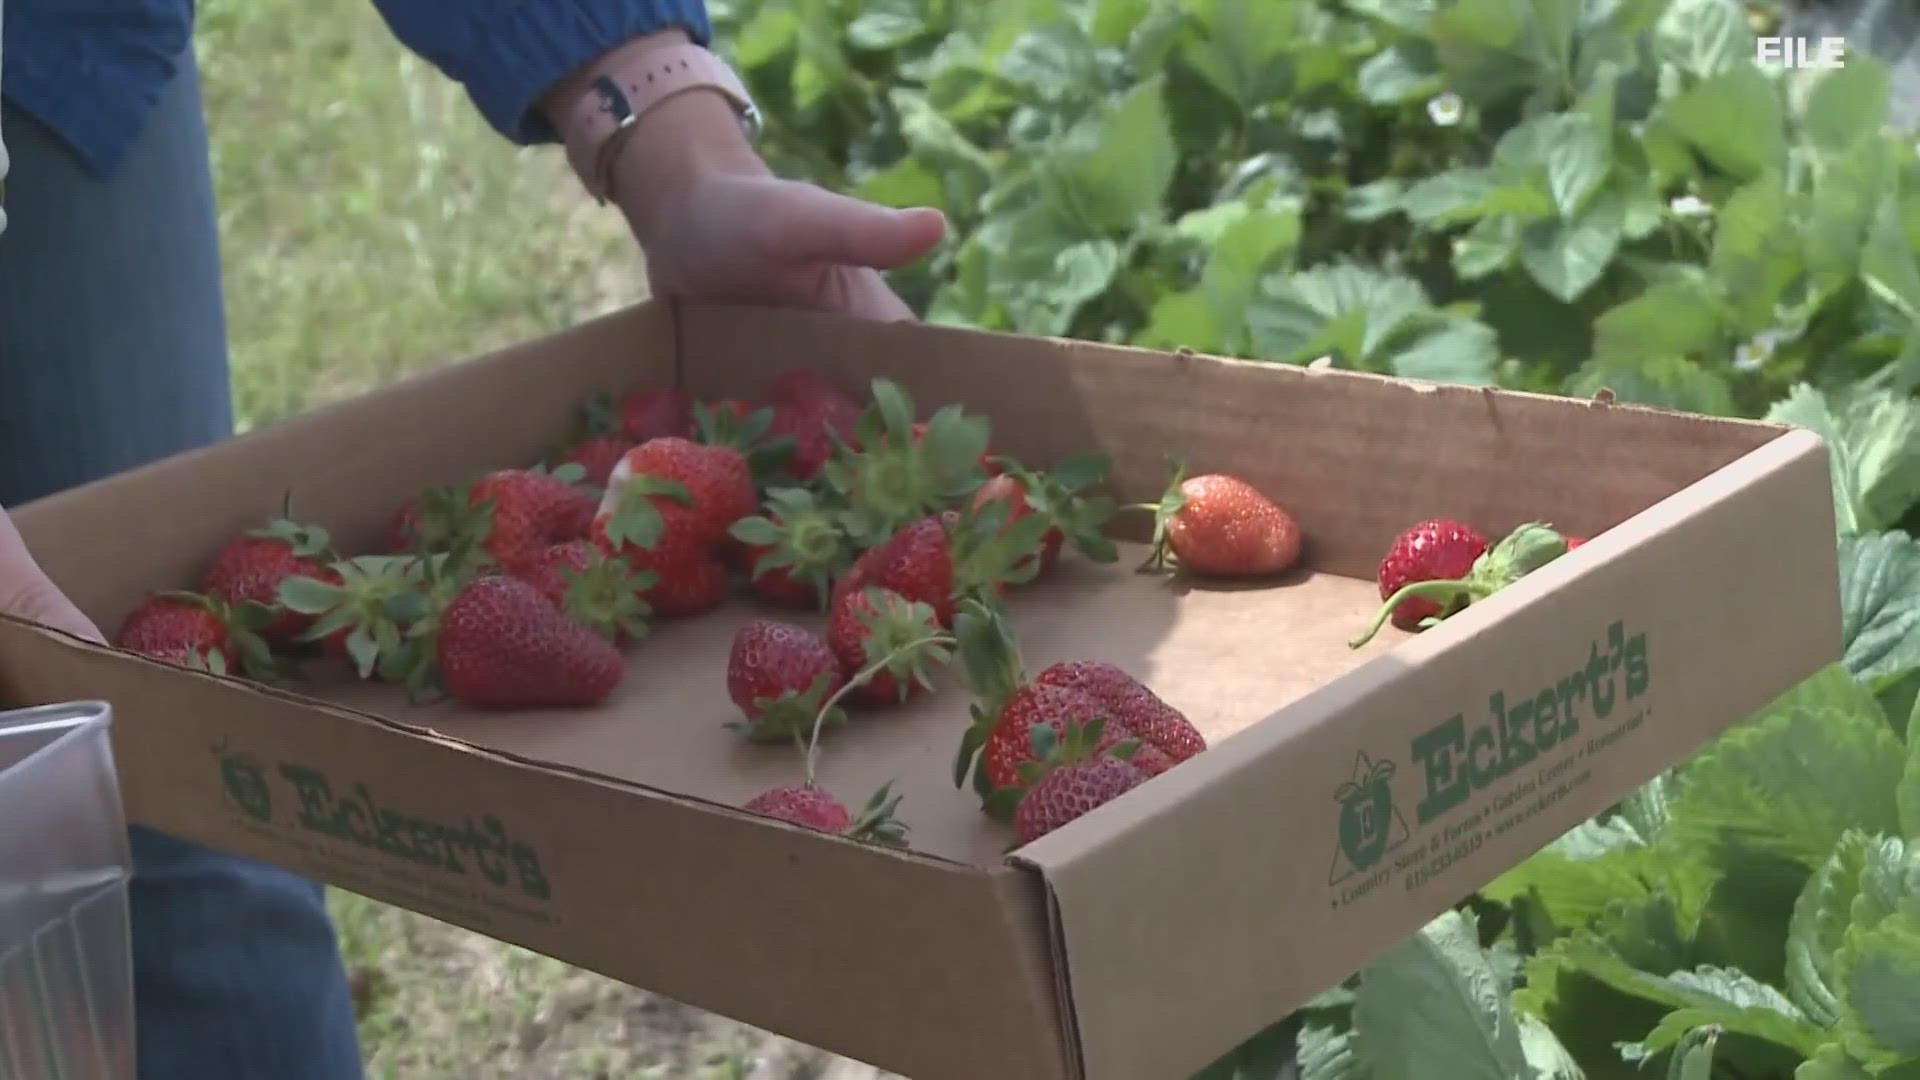 Eckert's Farm in Belleville is opening its strawberry fields for picking. Here's when you can visit this year.